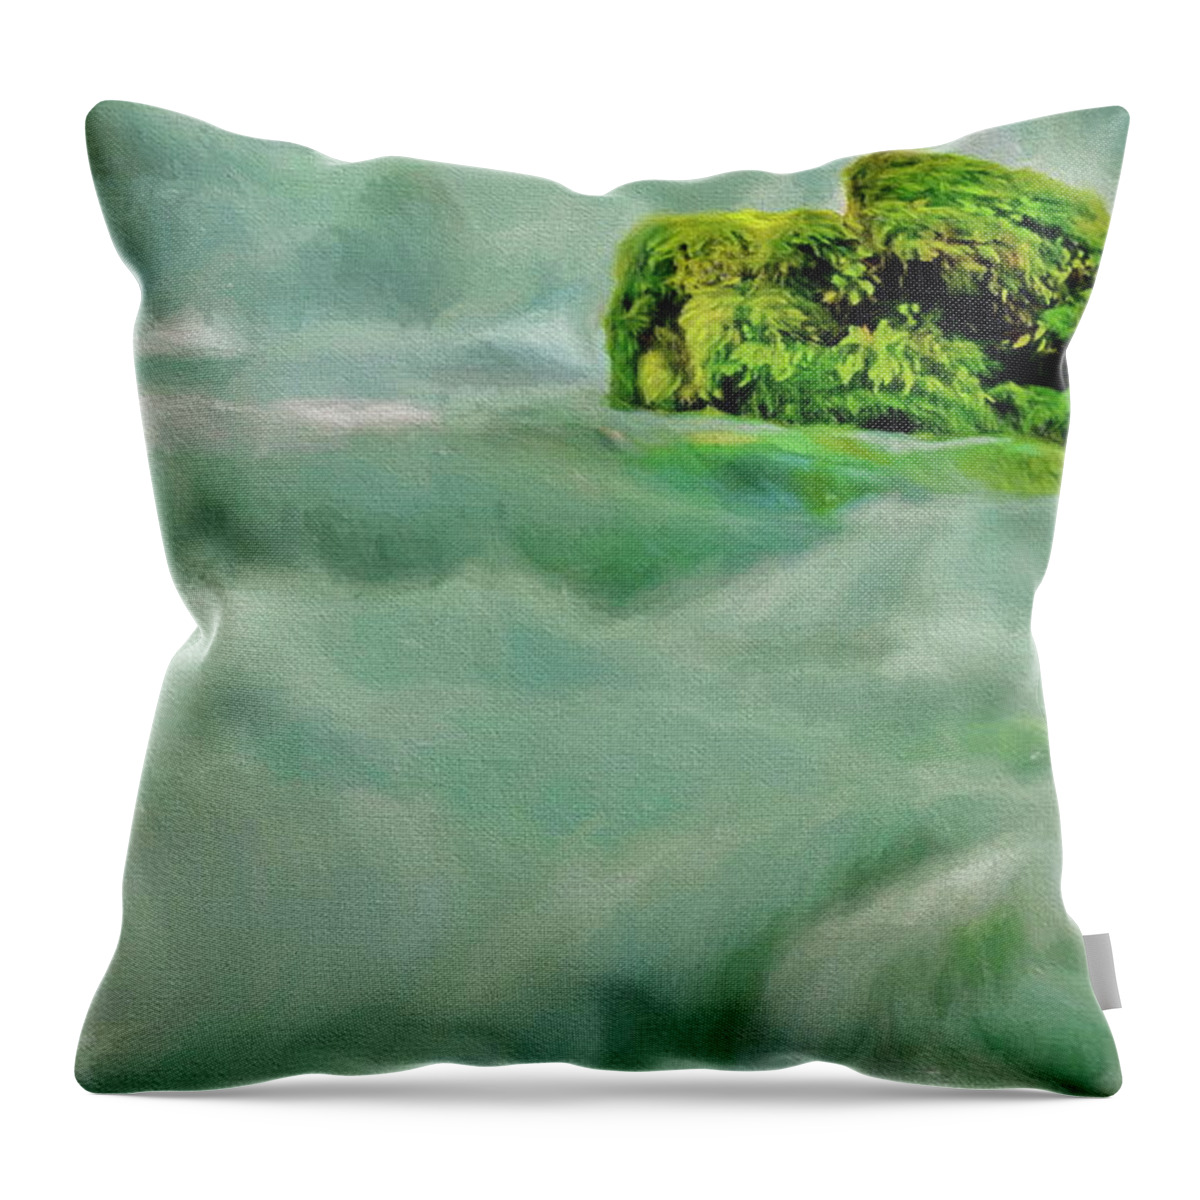 Painting Throw Pillow featuring the digital art Mossy Rock in Winter's Stream by Russ Harris